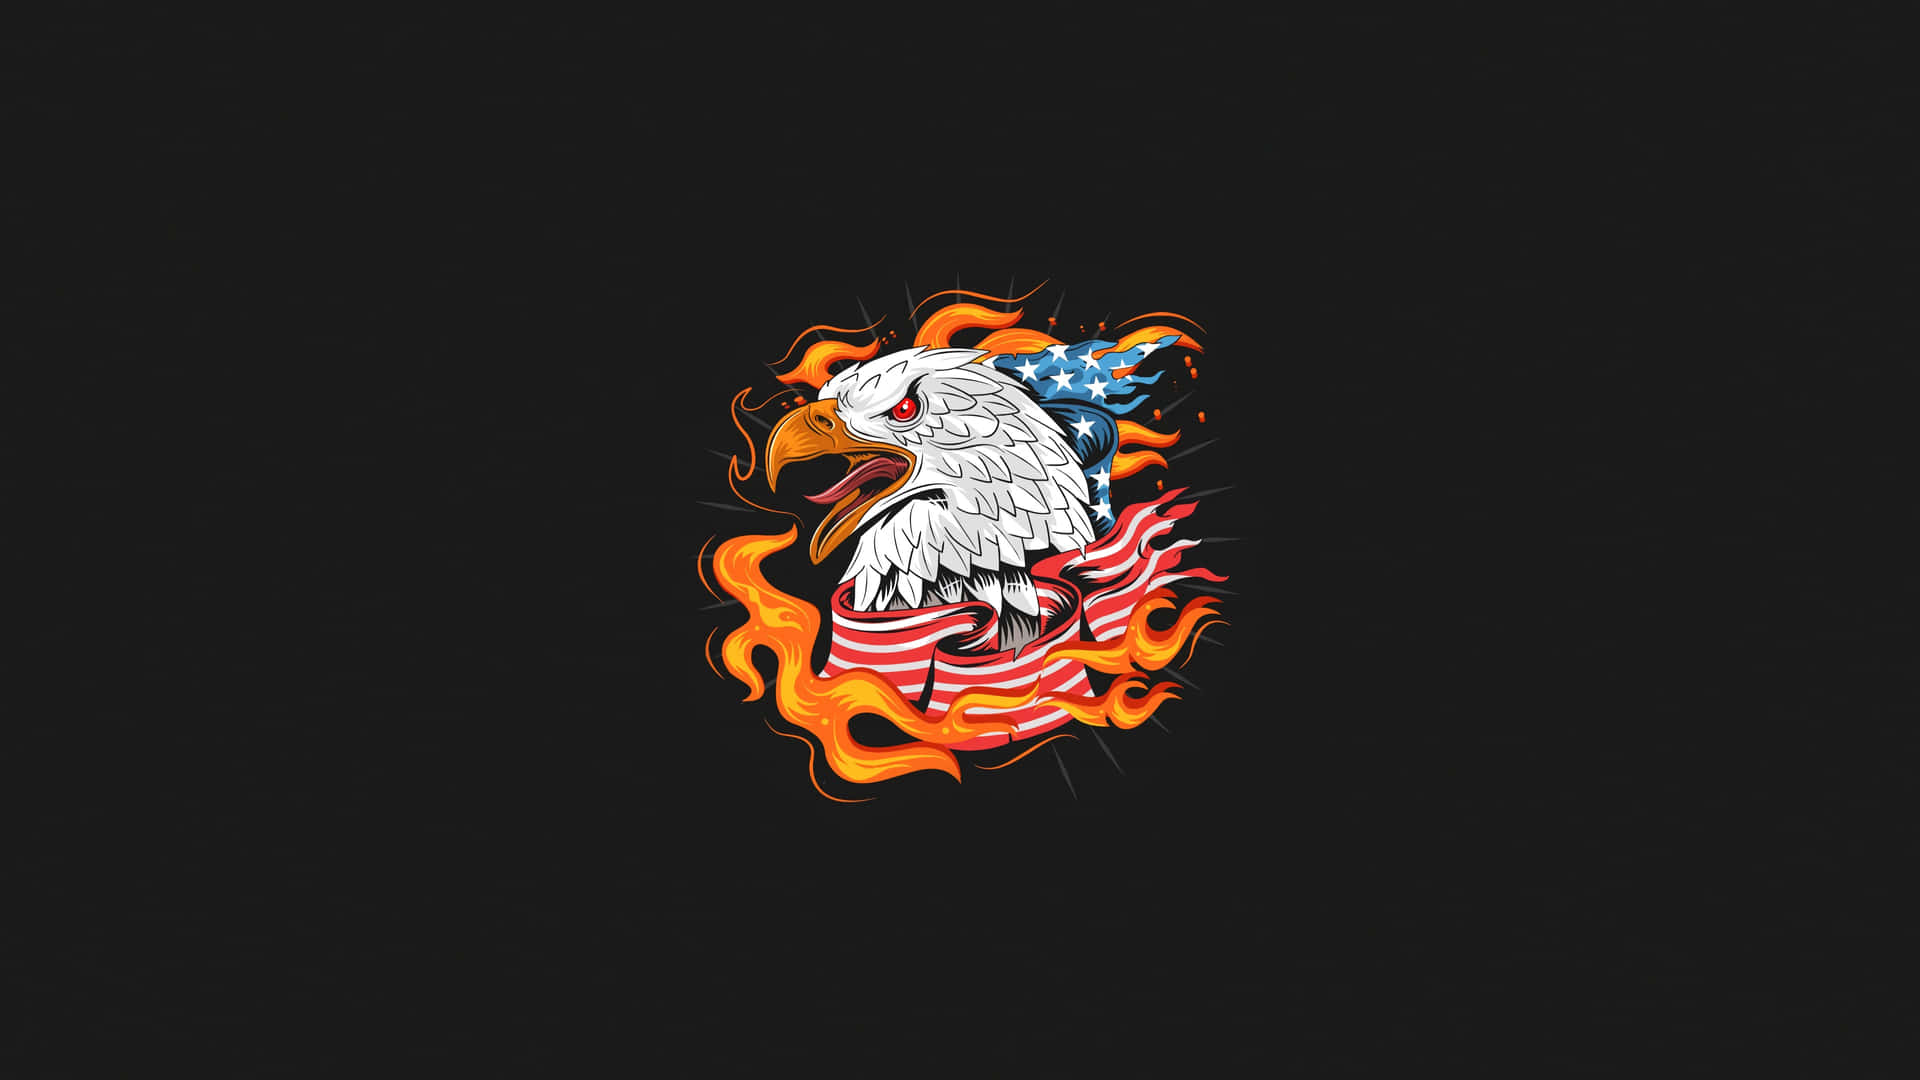 An Eagle With Flames On A Black Background